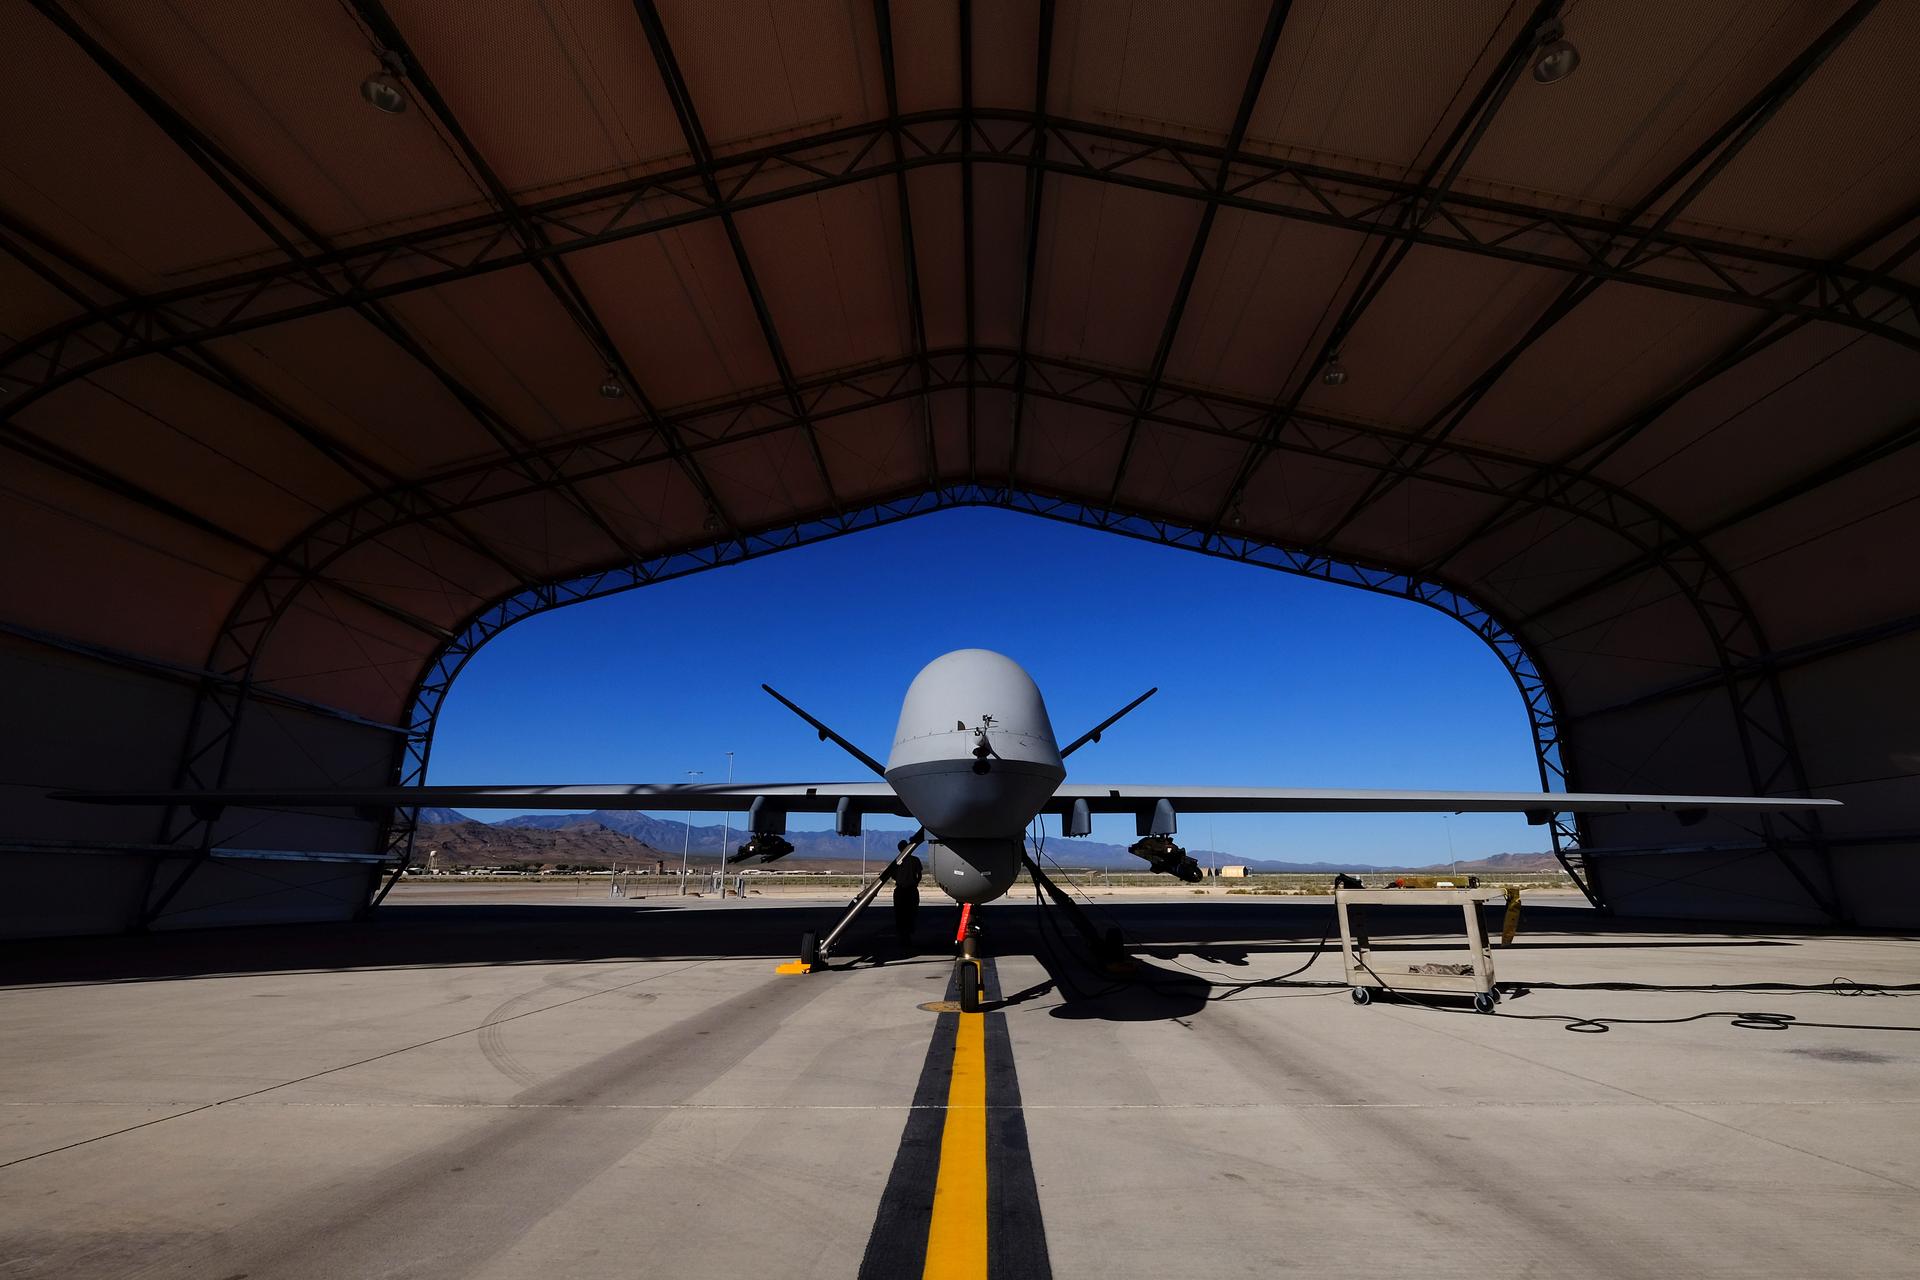 A U.S. Air Force MQ-9 Reaper drone sits in a hanger at Creech Air Force Base May 19, 2016. The base in Nevada is the hub for the military’s unmanned aircraft operations in the United States.